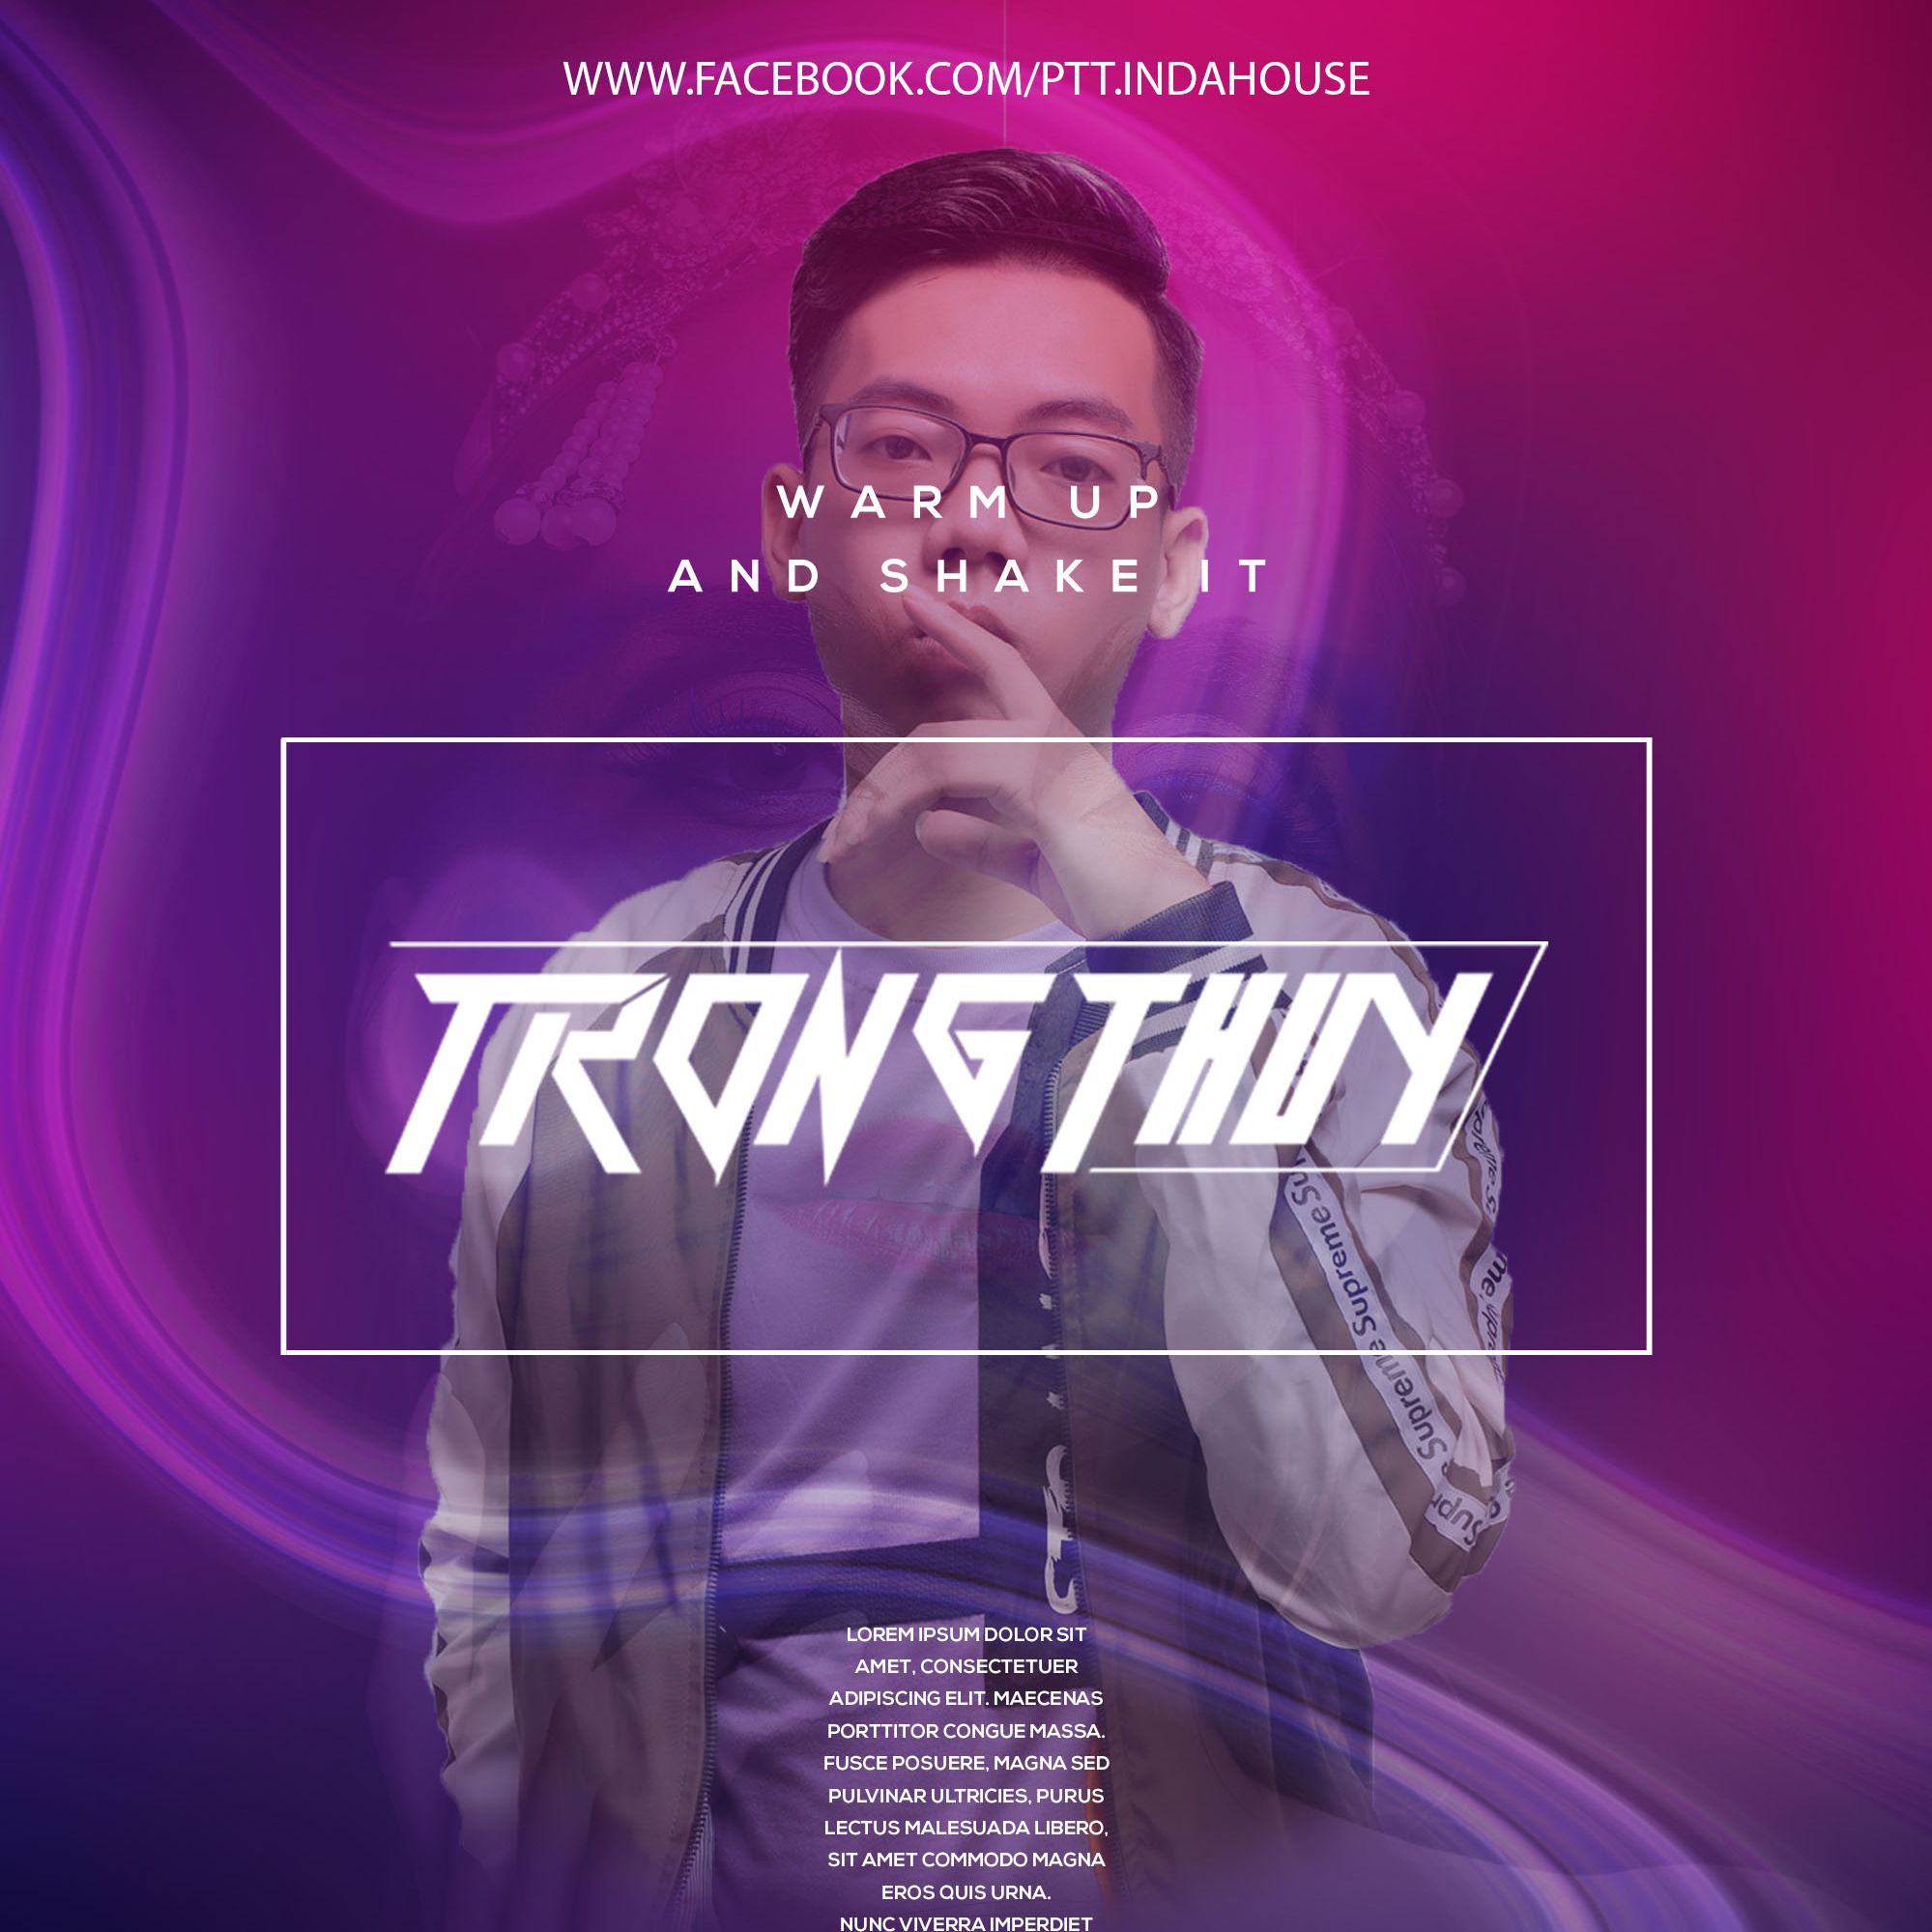 Daxistin MY HUMP FT KISS A GIRL - TRONG THUY REMIX FULL